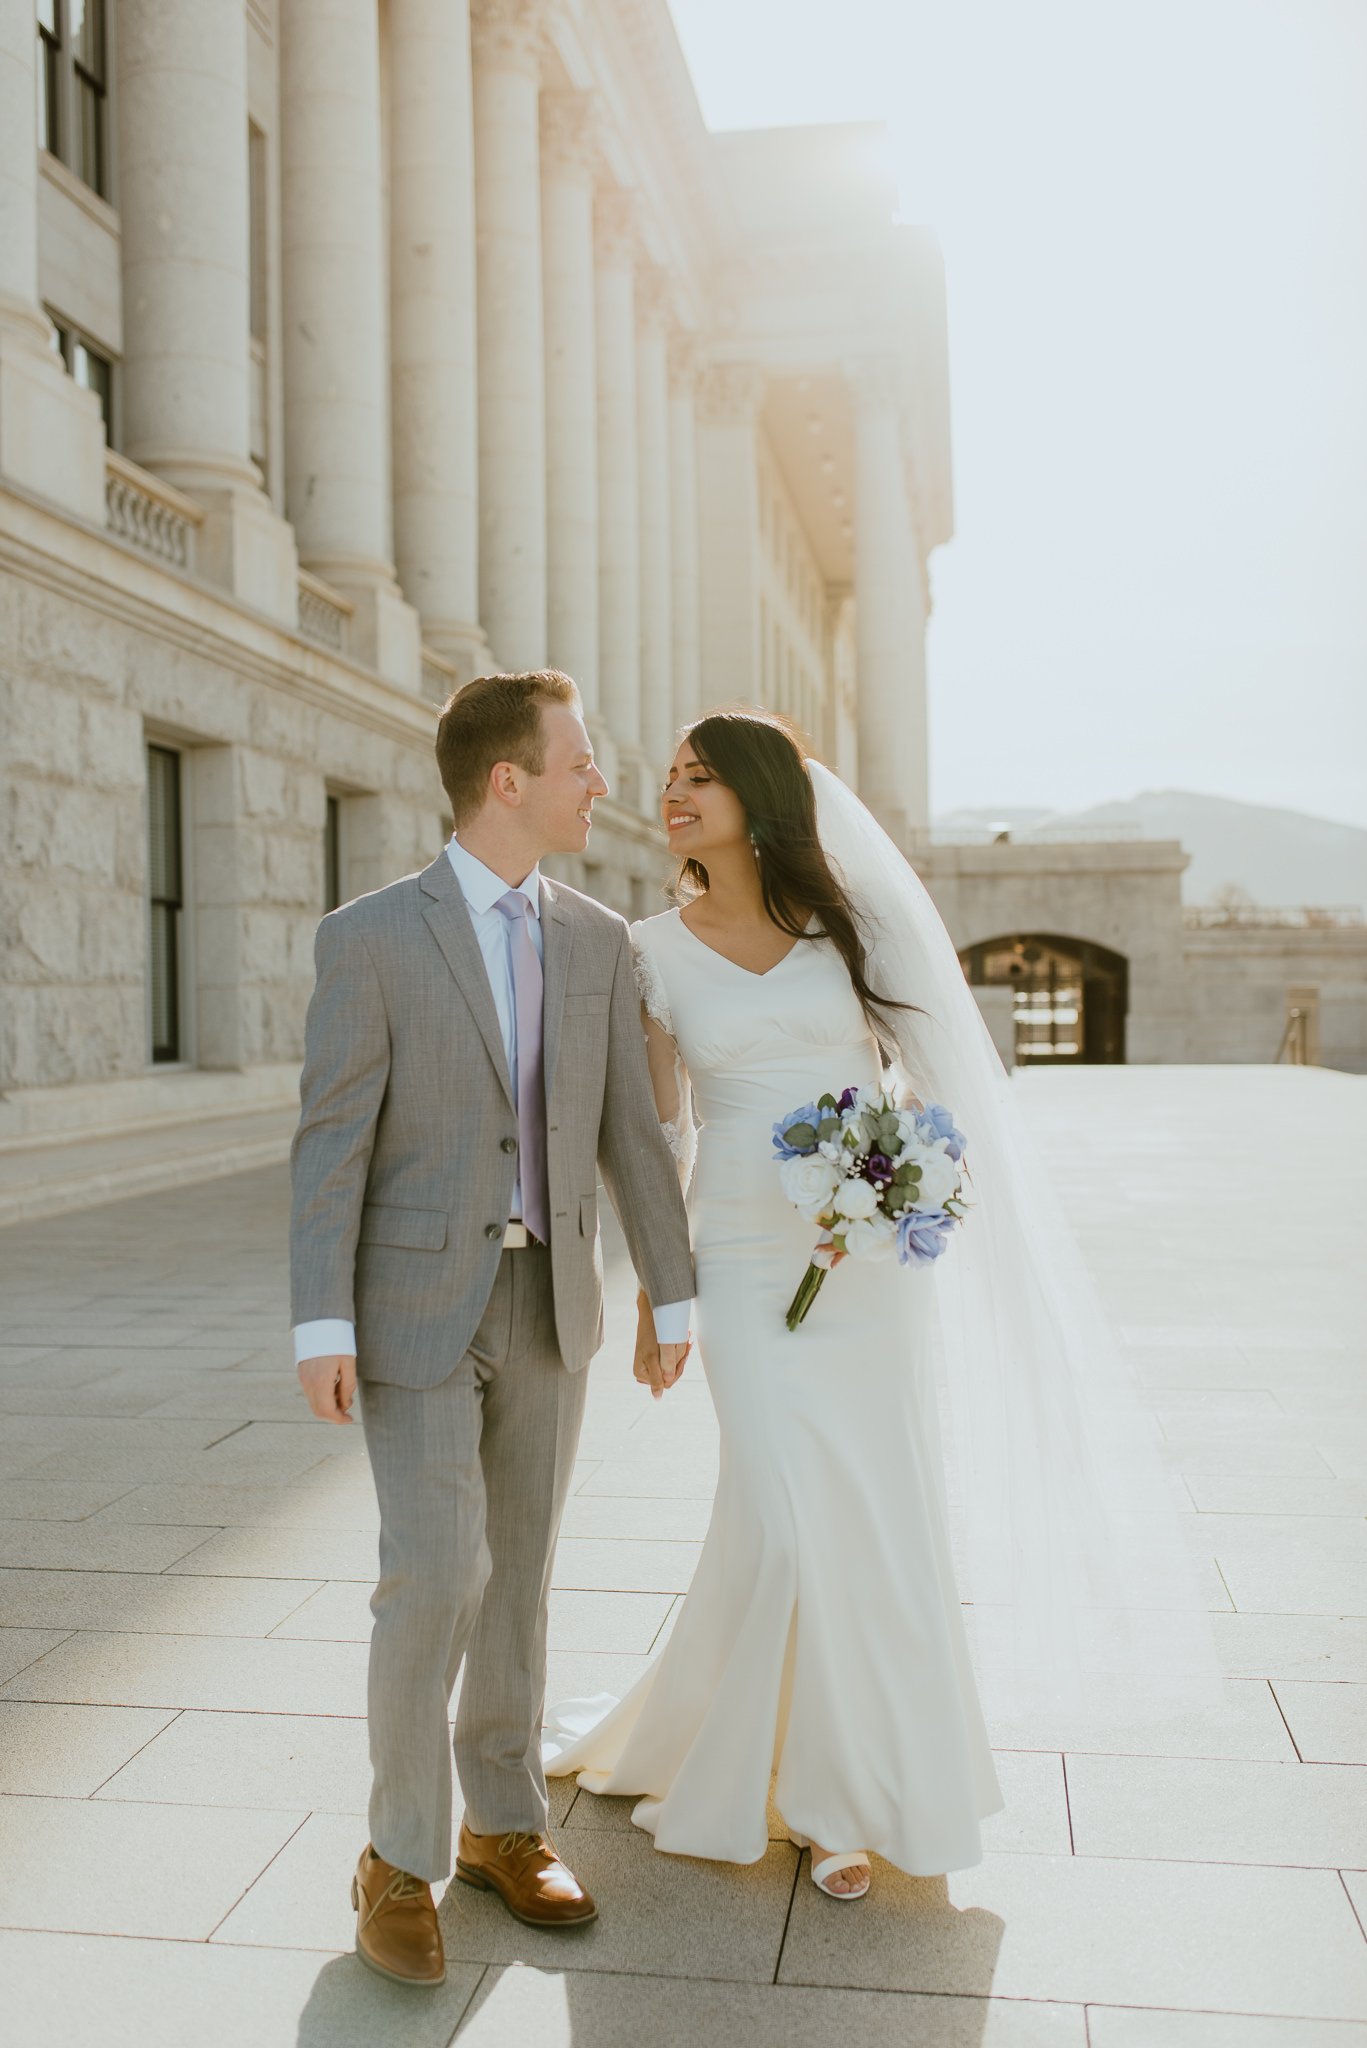 Utah-State-Capitol-Spring-Blossons-Bountiful-LDS-Wedding-Hopesandcheers-photo-13